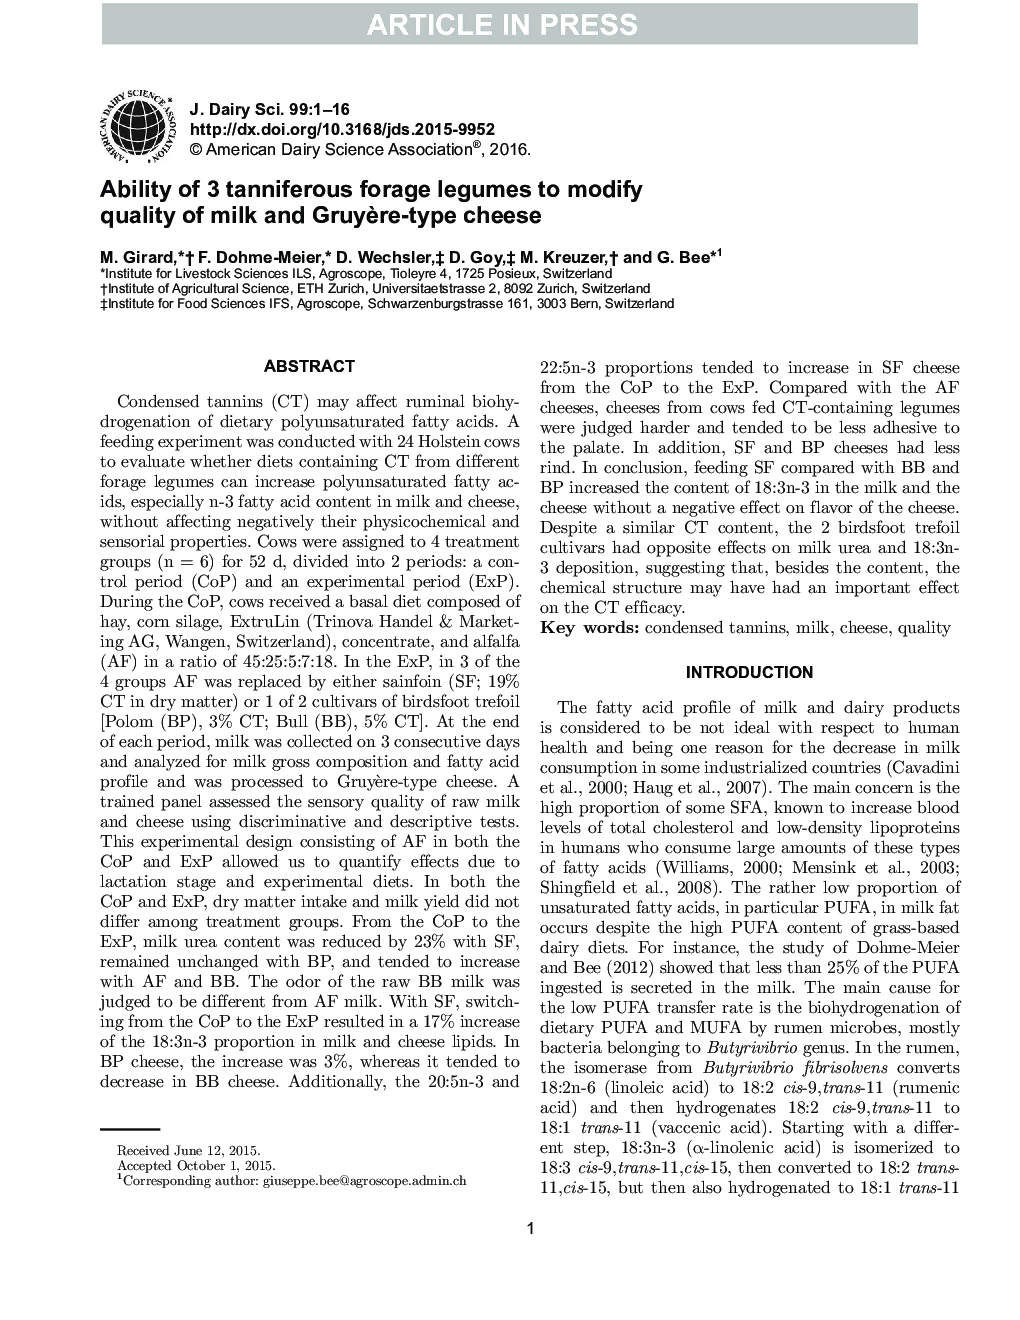 Ability of 3 tanniferous forage legumes to modify quality of milk and GruyÃ¨re-type cheese